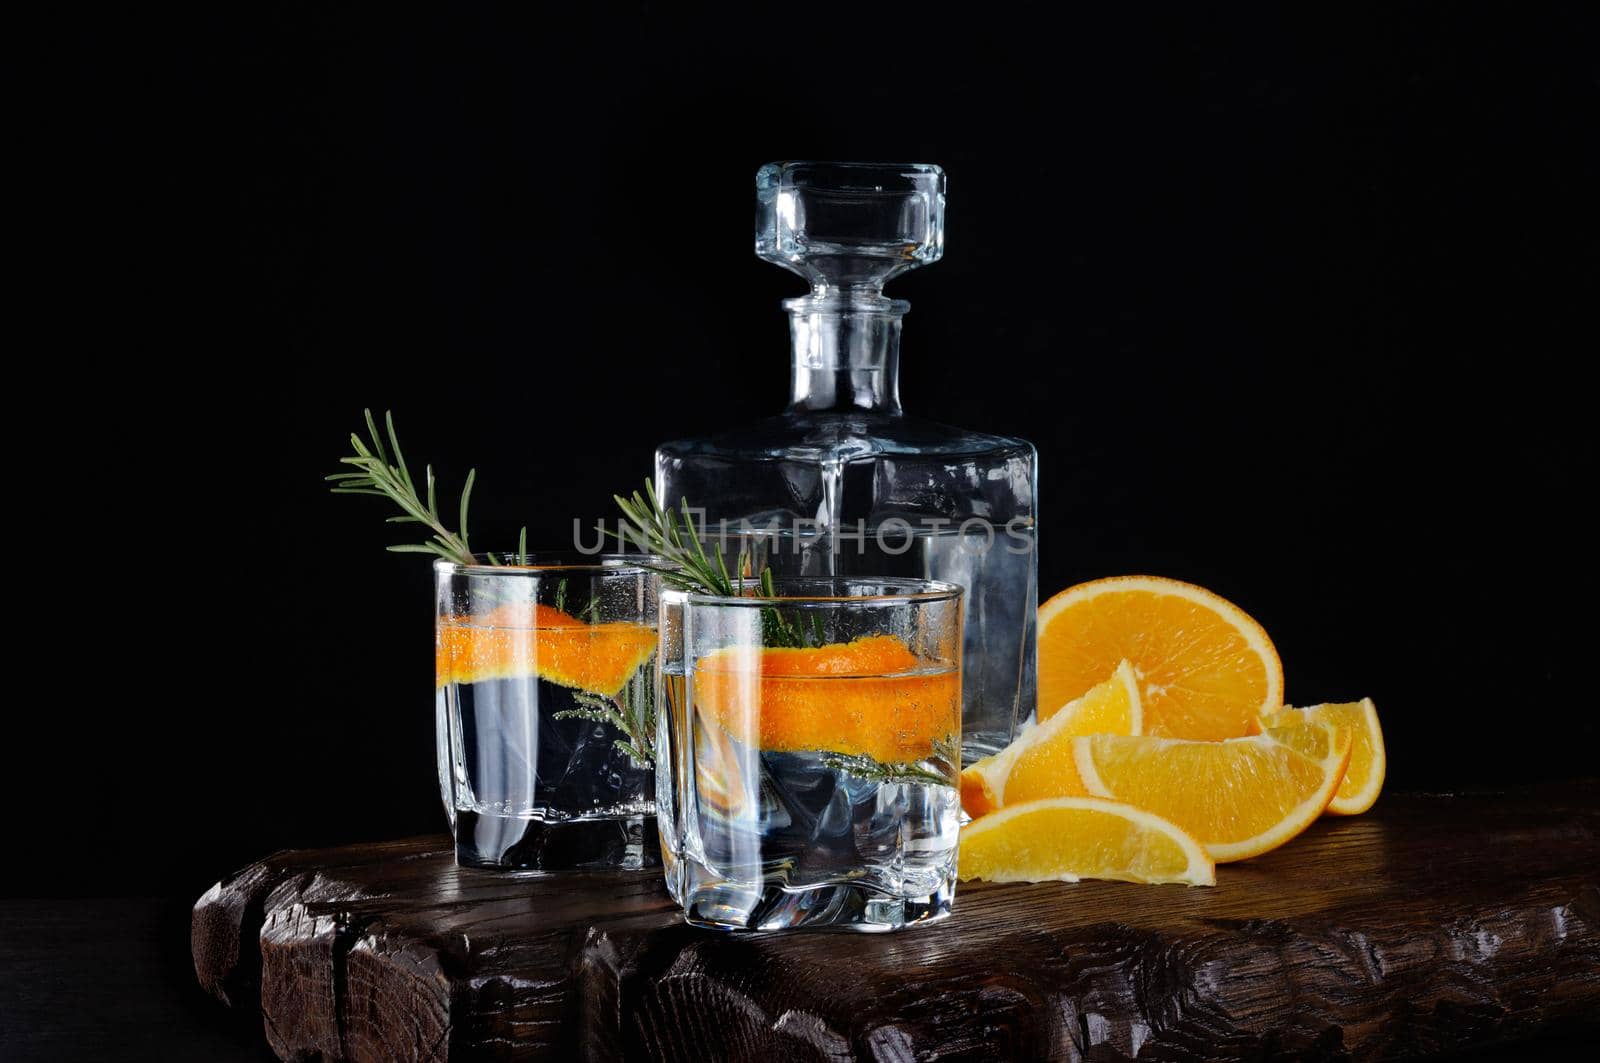 Classic Dry Gin with tonic and orange zest by Apolonia